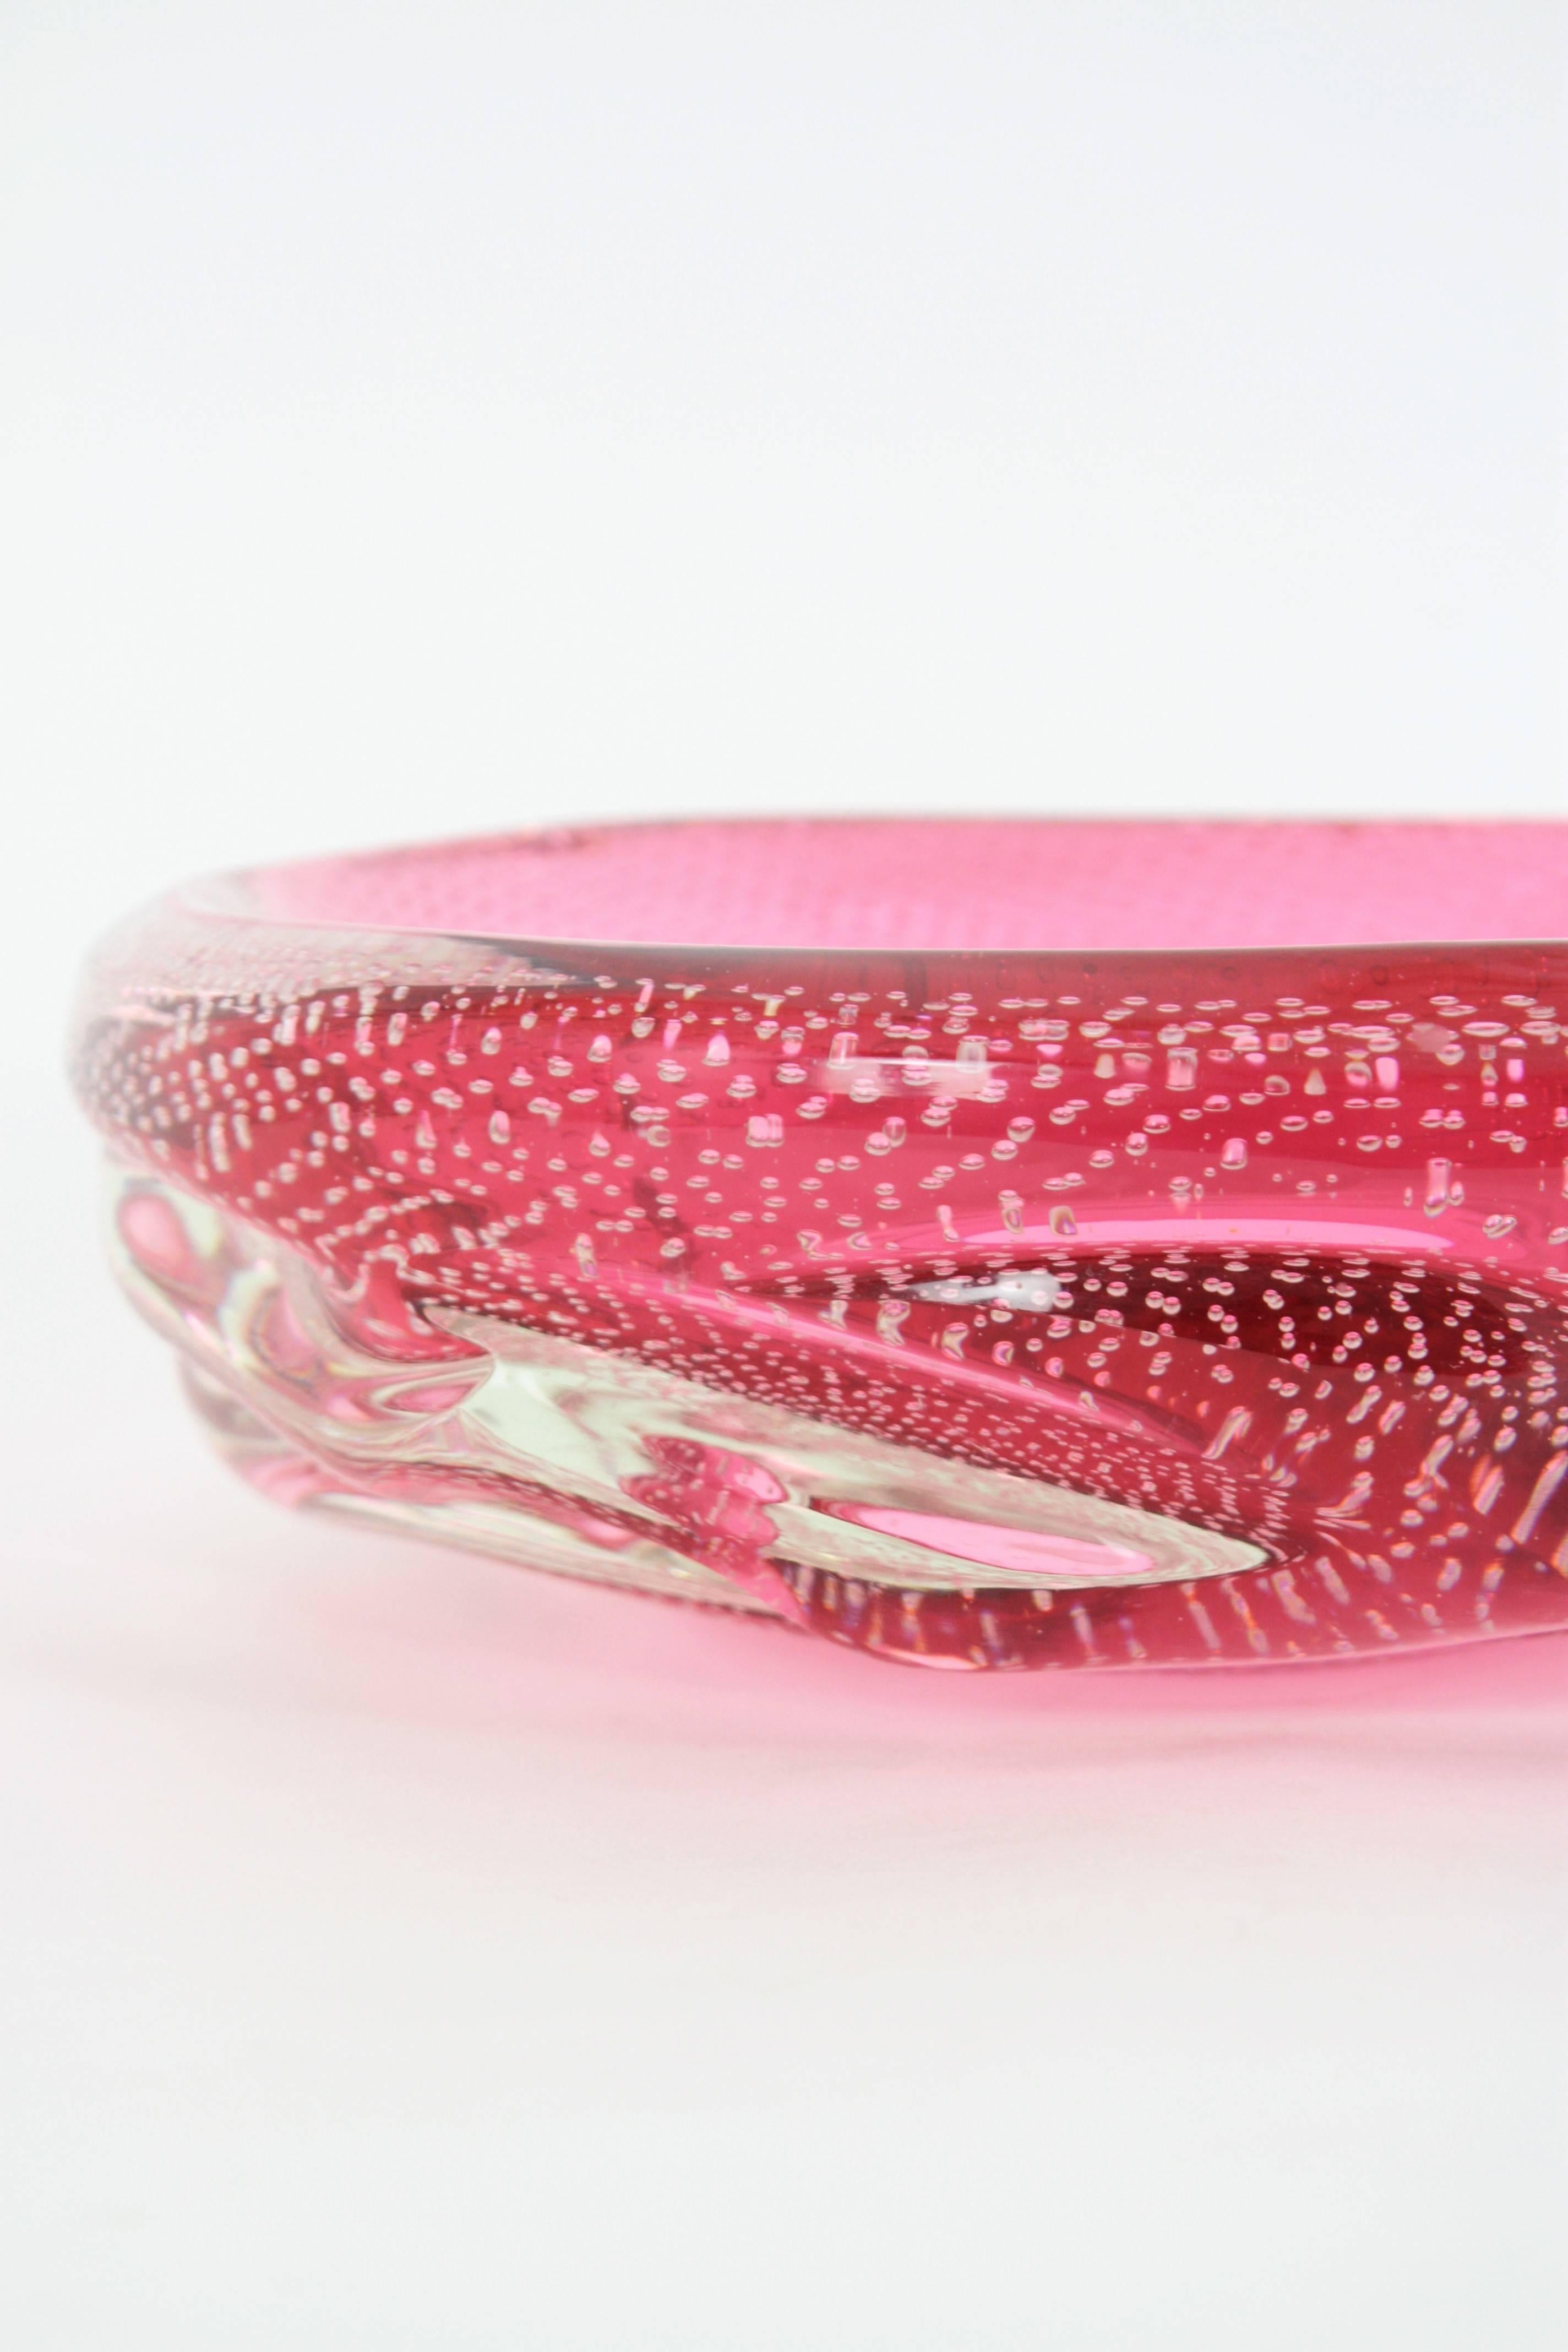 Mid-Century Modern Archimede Seguso Pink Controlled Bubbles Murano Glass Centrepiece / Large Bowl